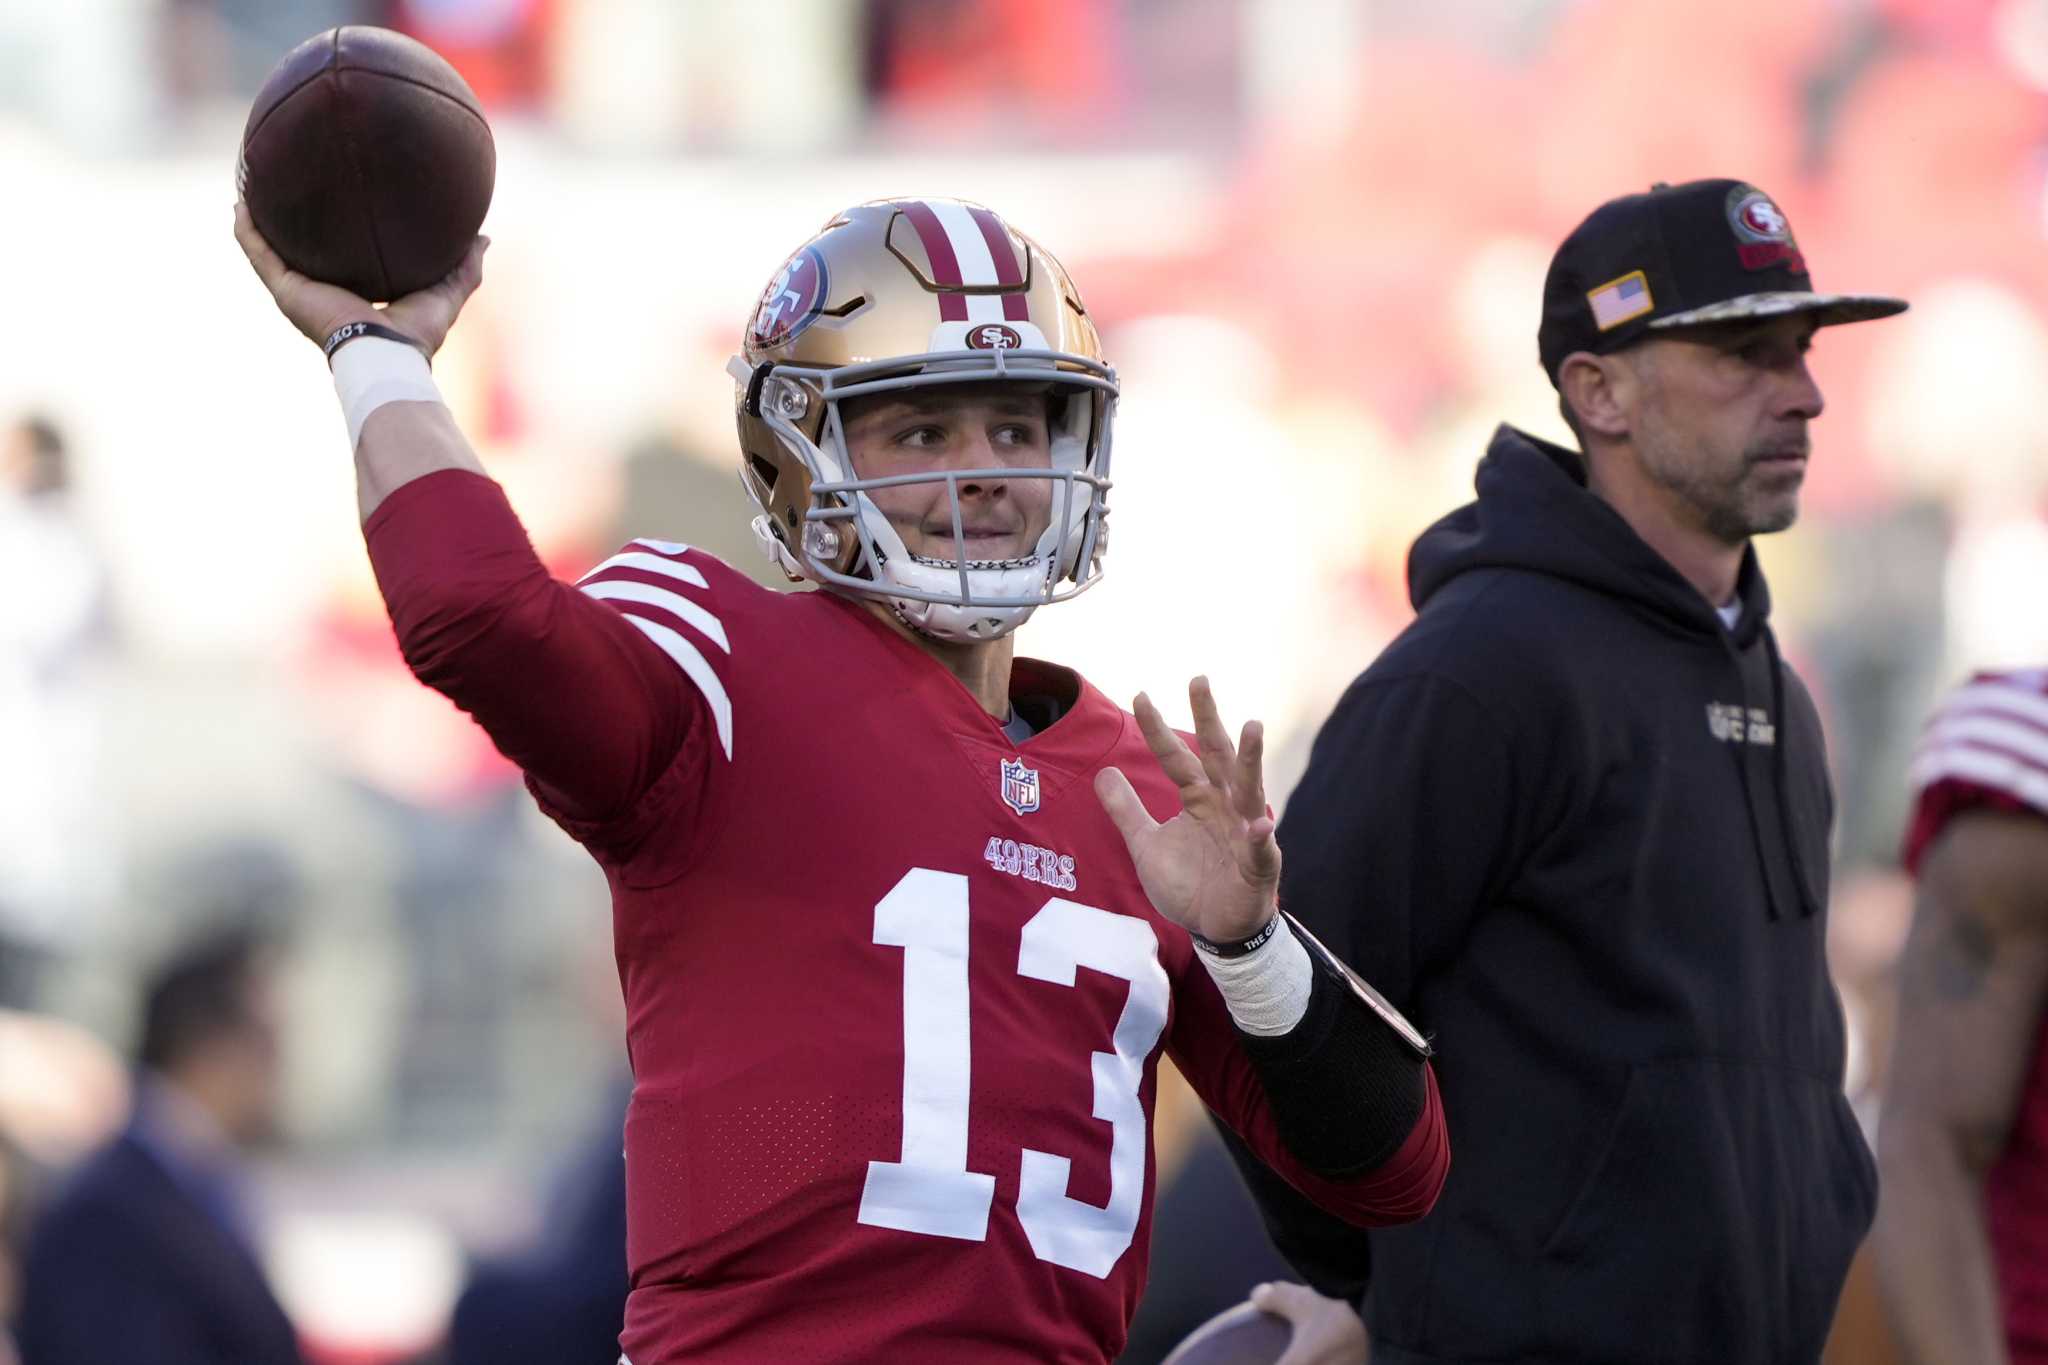 Kyle Shanahan tried trading 2nd overall draft pick (and more) for Kirk  Cousins